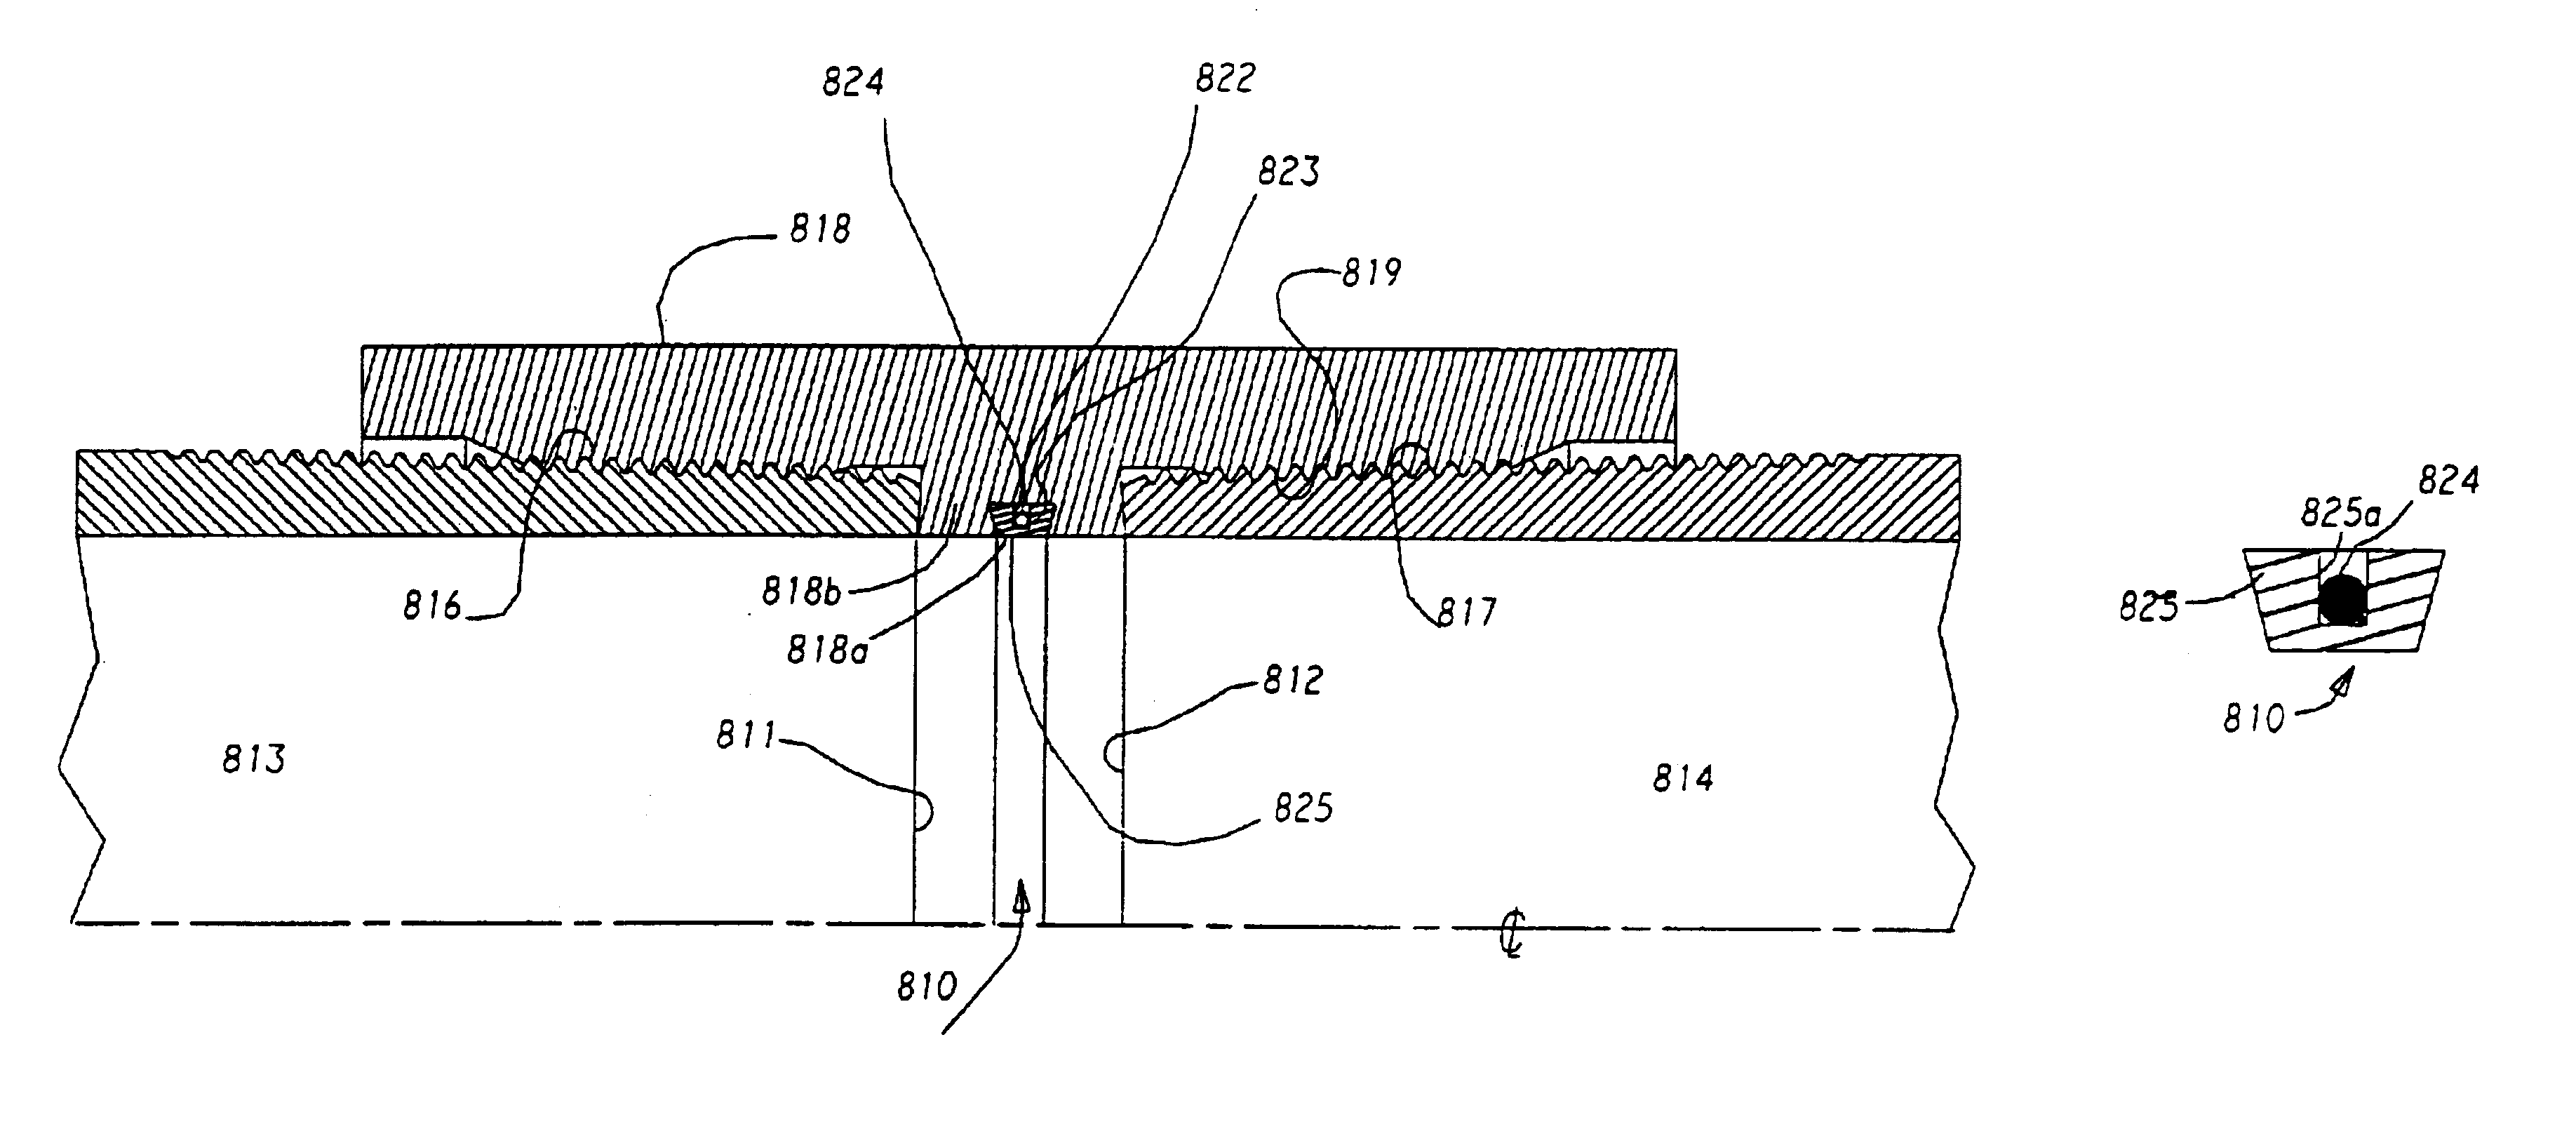 System, method and apparatus for deploying a data resource within a threaded pipe coupling